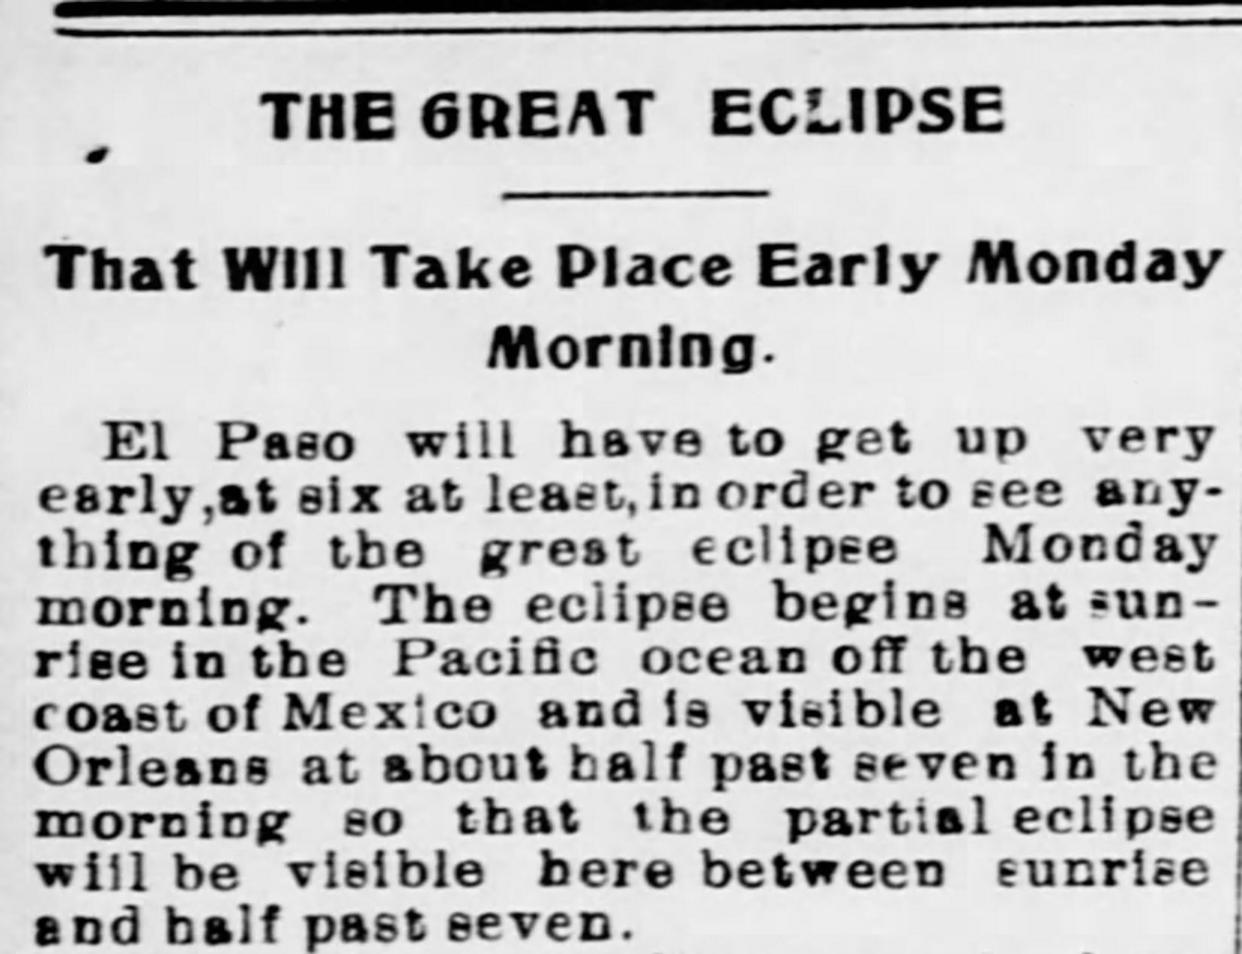 May 26, 1900, The great eclipse